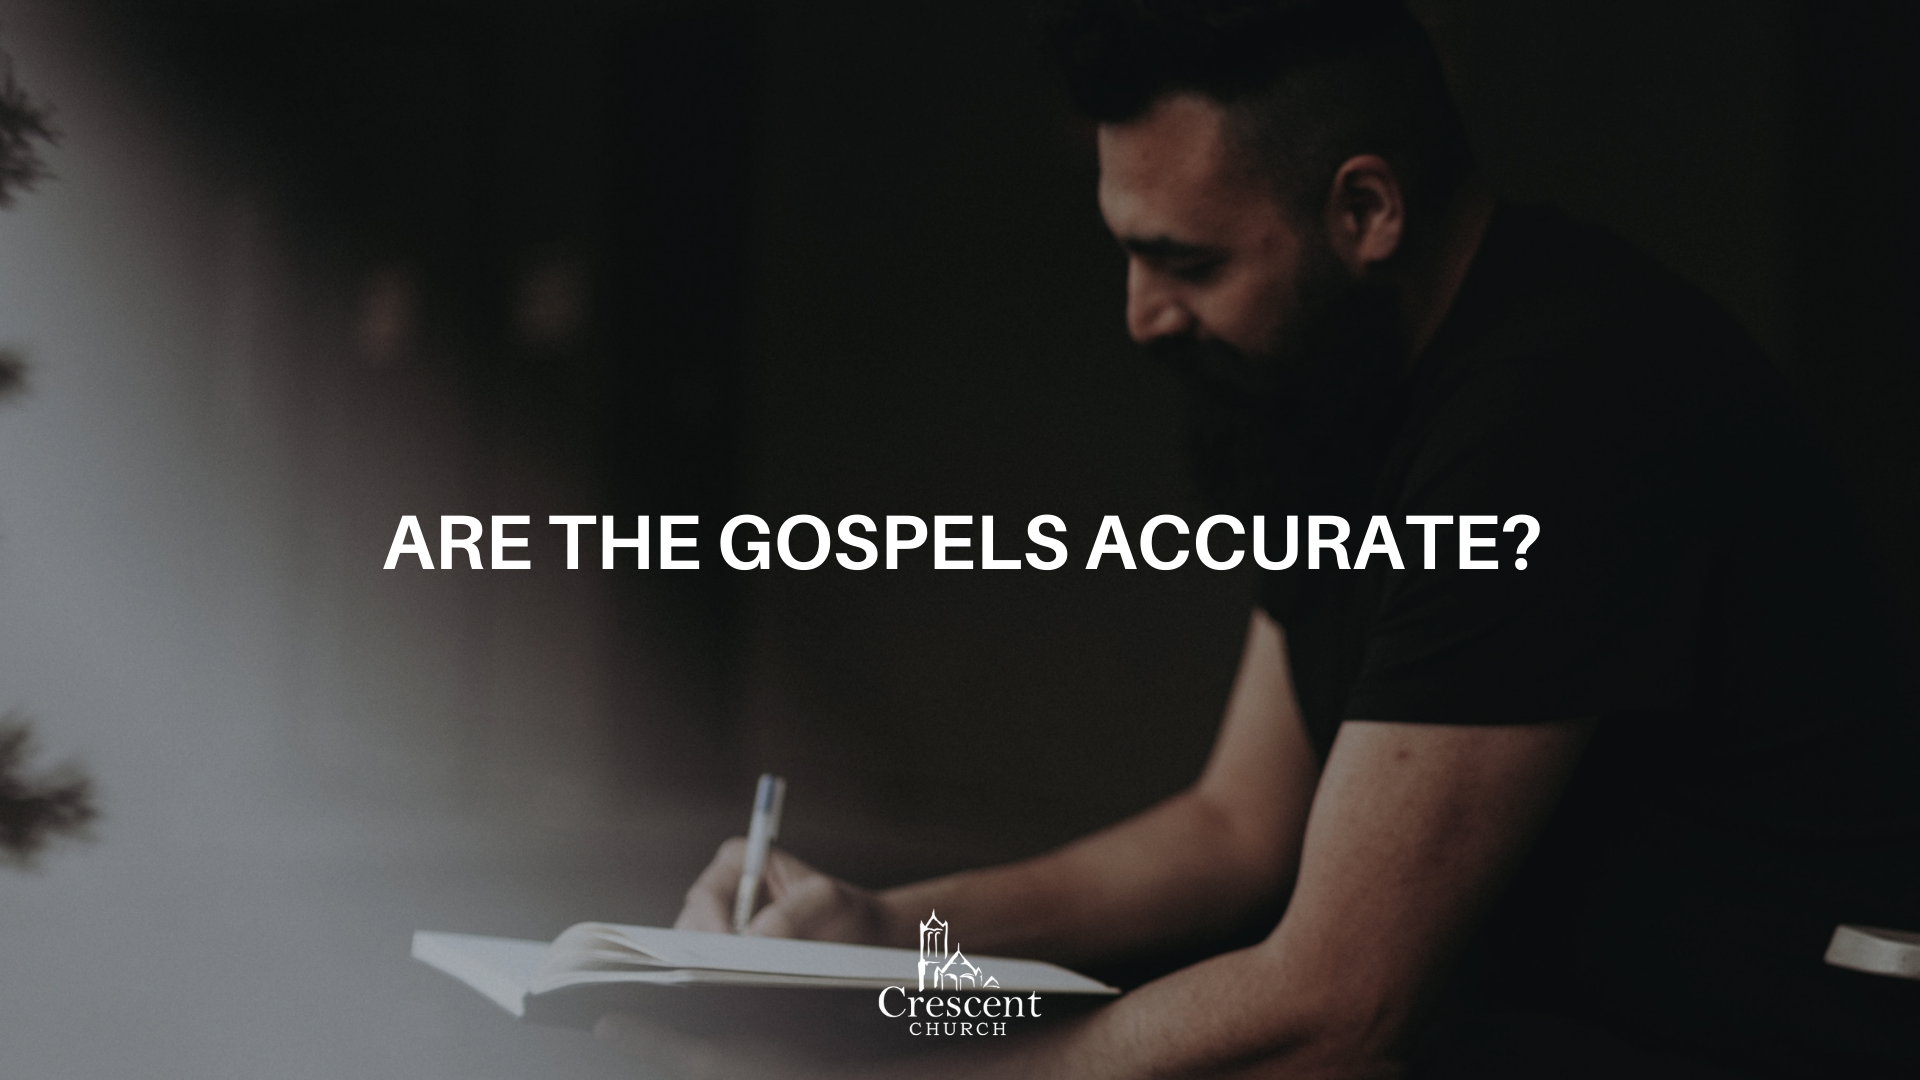 Are the Gospels accurate?